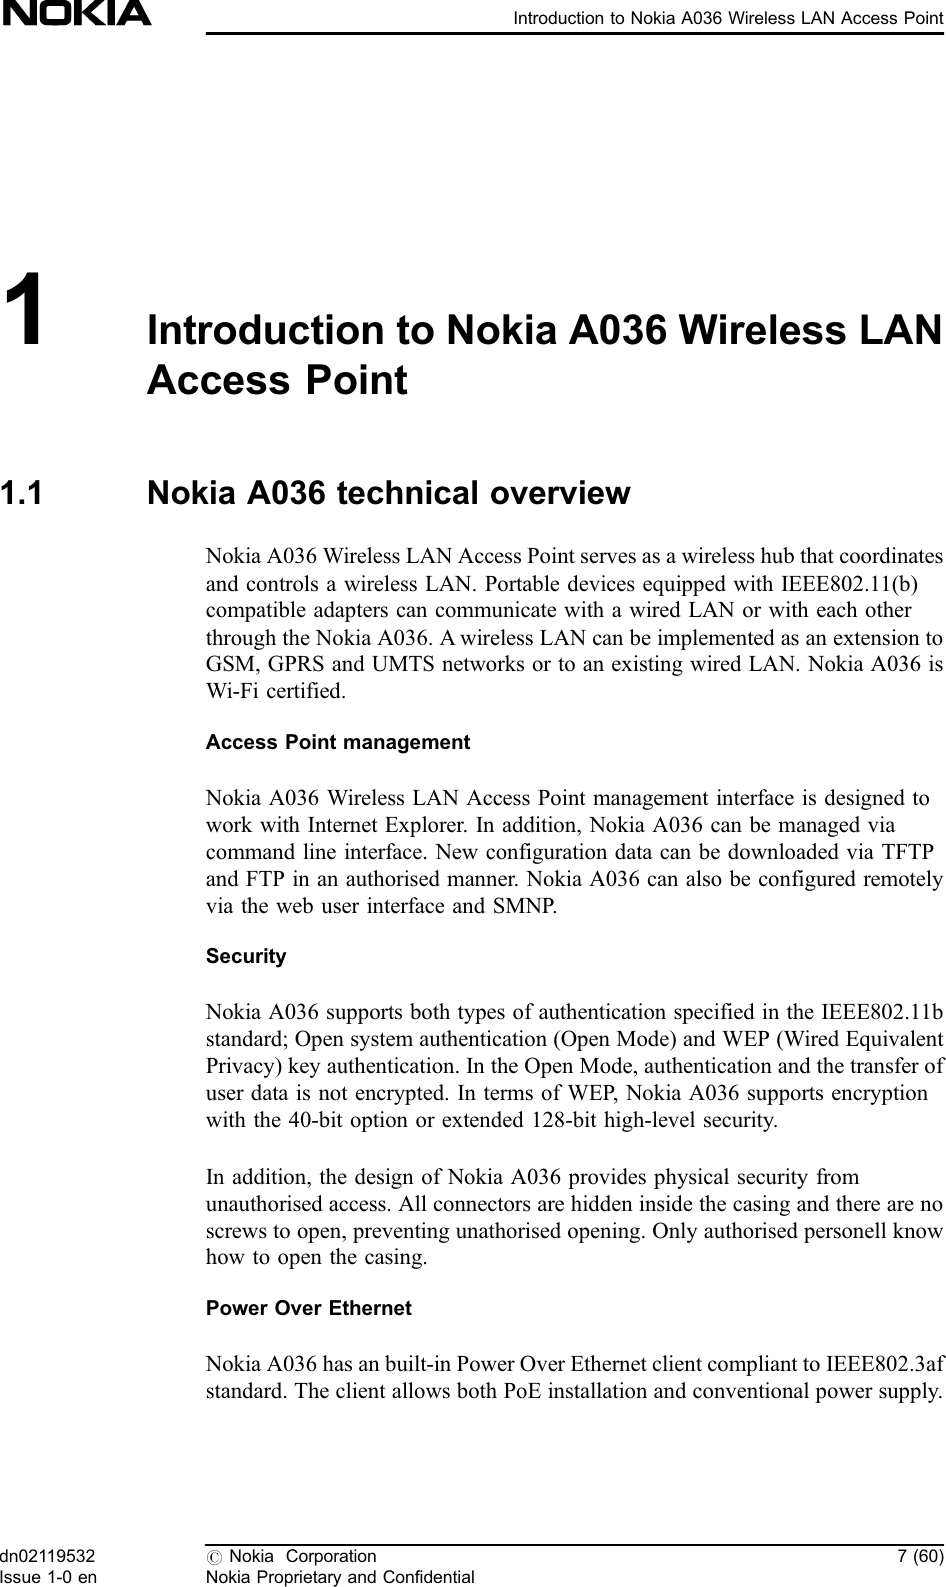 1Introduction to Nokia A036 Wireless LANAccess Point1.1 Nokia A036 technical overviewNokia A036 Wireless LAN Access Point serves as a wireless hub that coordinatesand controls a wireless LAN. Portable devices equipped with IEEE802.11(b)compatible adapters can communicate with a wired LAN or with each otherthrough the Nokia A036. A wireless LAN can be implemented as an extension toGSM, GPRS and UMTS networks or to an existing wired LAN. Nokia A036 isWi-Fi certified.Access Point managementNokia A036 Wireless LAN Access Point management interface is designed towork with Internet Explorer. In addition, Nokia A036 can be managed viacommand line interface. New configuration data can be downloaded via TFTPand FTP in an authorised manner. Nokia A036 can also be configured remotelyvia the web user interface and SMNP.SecurityNokia A036 supports both types of authentication specified in the IEEE802.11bstandard; Open system authentication (Open Mode) and WEP (Wired EquivalentPrivacy) key authentication. In the Open Mode, authentication and the transfer ofuser data is not encrypted. In terms of WEP, Nokia A036 supports encryptionwith the 40-bit option or extended 128-bit high-level security.In addition, the design of Nokia A036 provides physical security fromunauthorised access. All connectors are hidden inside the casing and there are noscrews to open, preventing unathorised opening. Only authorised personell knowhow to open the casing.Power Over EthernetNokia A036 has an built-in Power Over Ethernet client compliant to IEEE802.3afstandard. The client allows both PoE installation and conventional power supply.dn02119532Issue 1-0 en#Nokia CorporationNokia Proprietary and Confidential7 (60)Introduction to Nokia A036 Wireless LAN Access Point